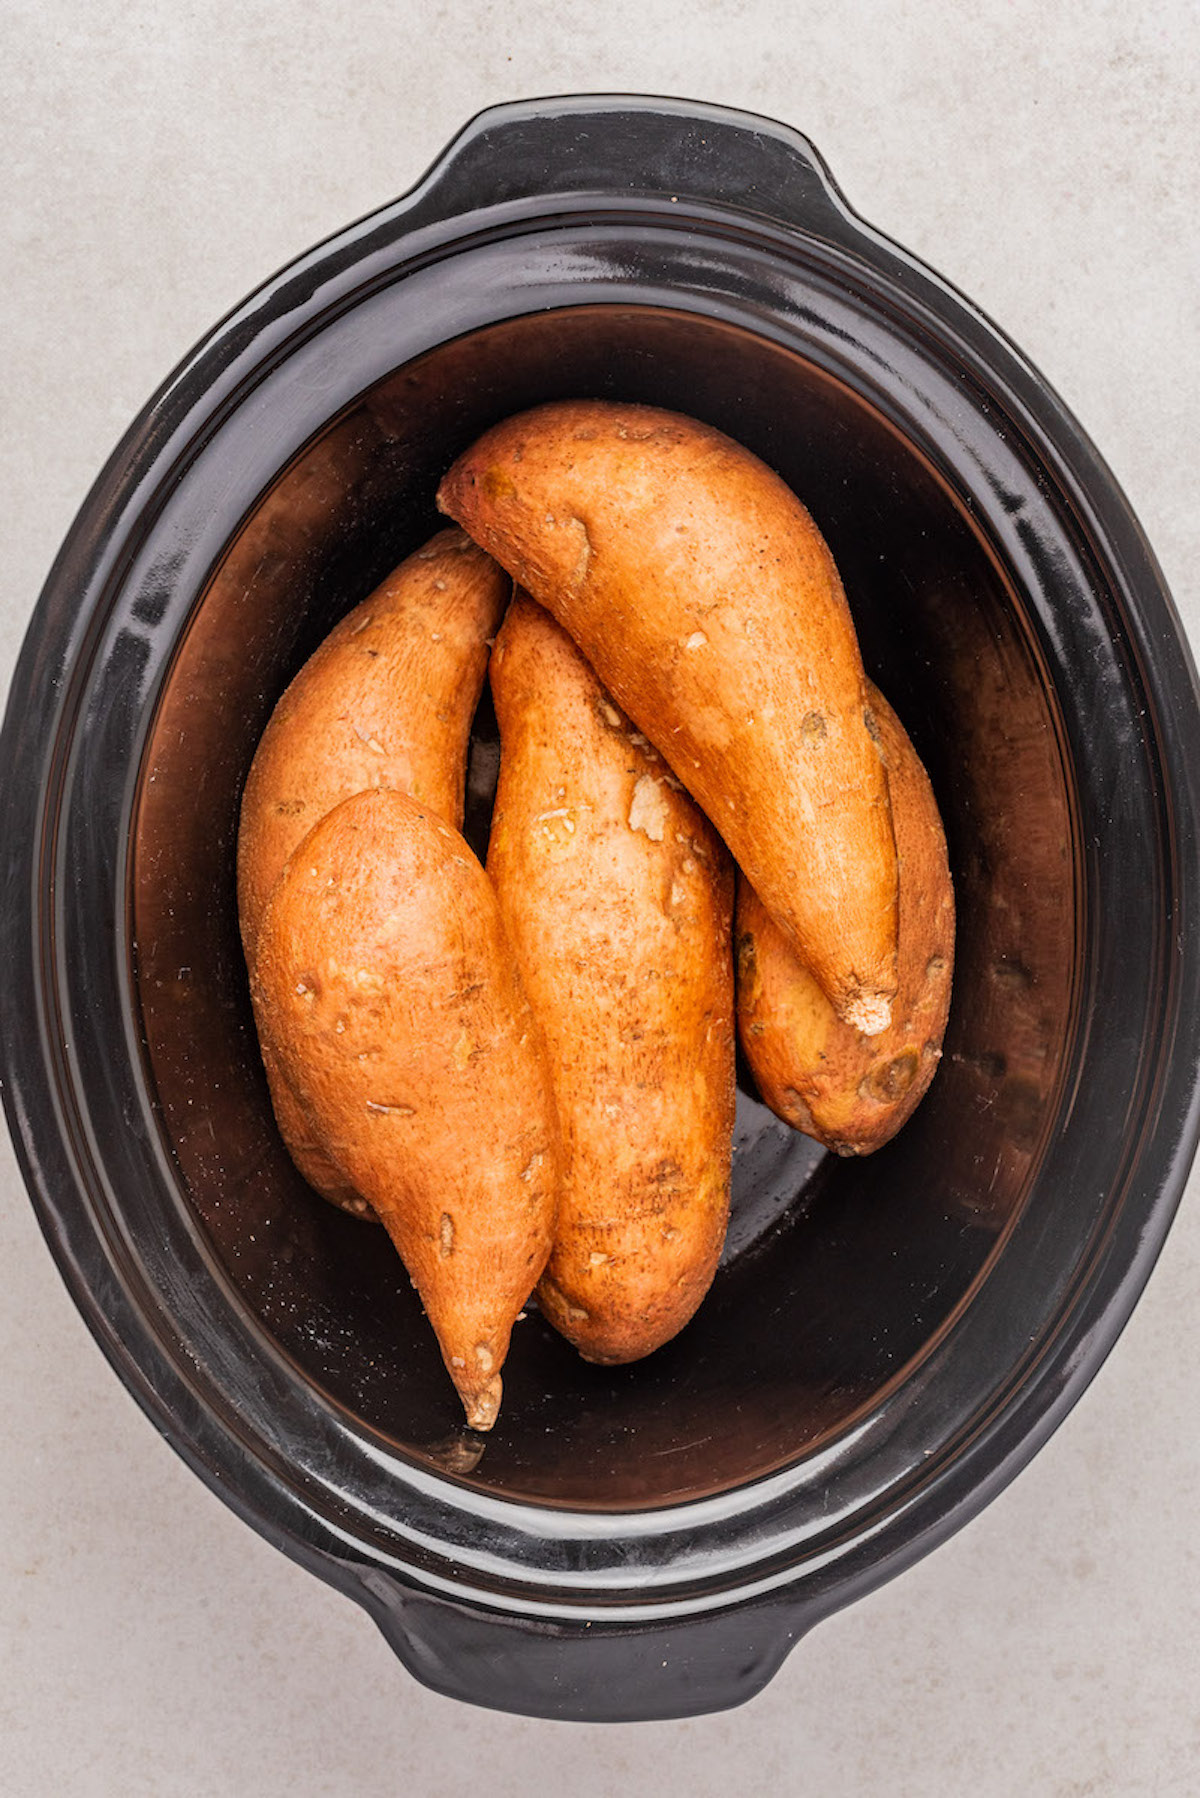 the sweet potatoes inside the slow cooker insert